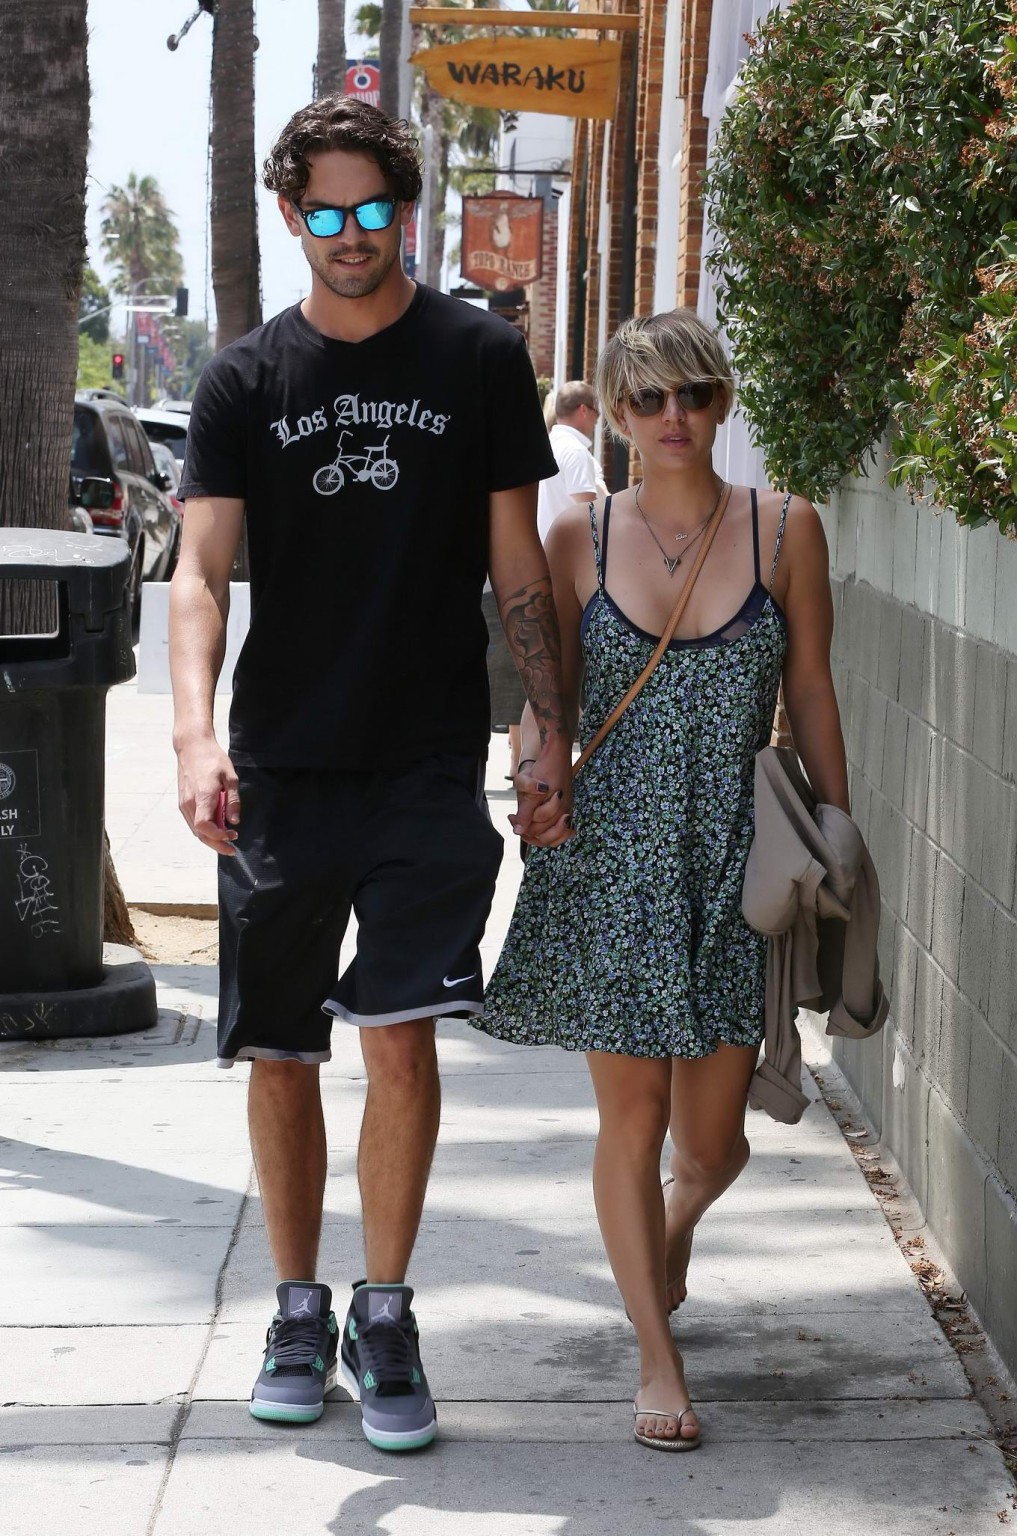 Kaley Cuoco boasting in her full bra all over Los Angeles #75193236